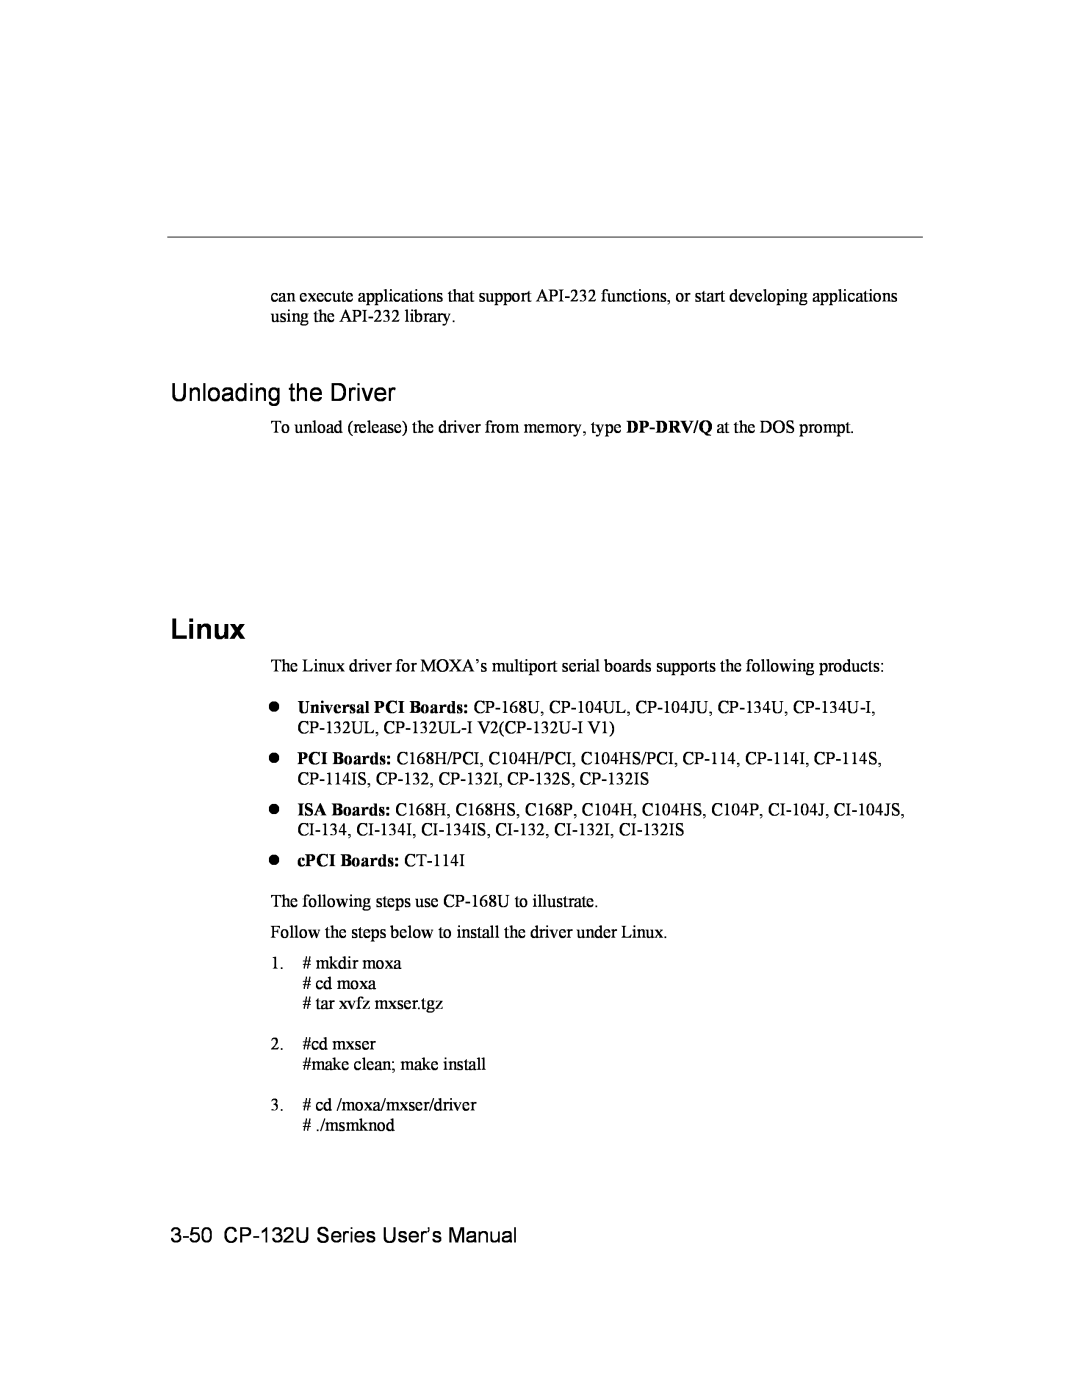 Moxa Technologies user manual Linux, Unloading the Driver, 3-50 CP-132U Series User’s Manual, cPCI Boards CT-114I 